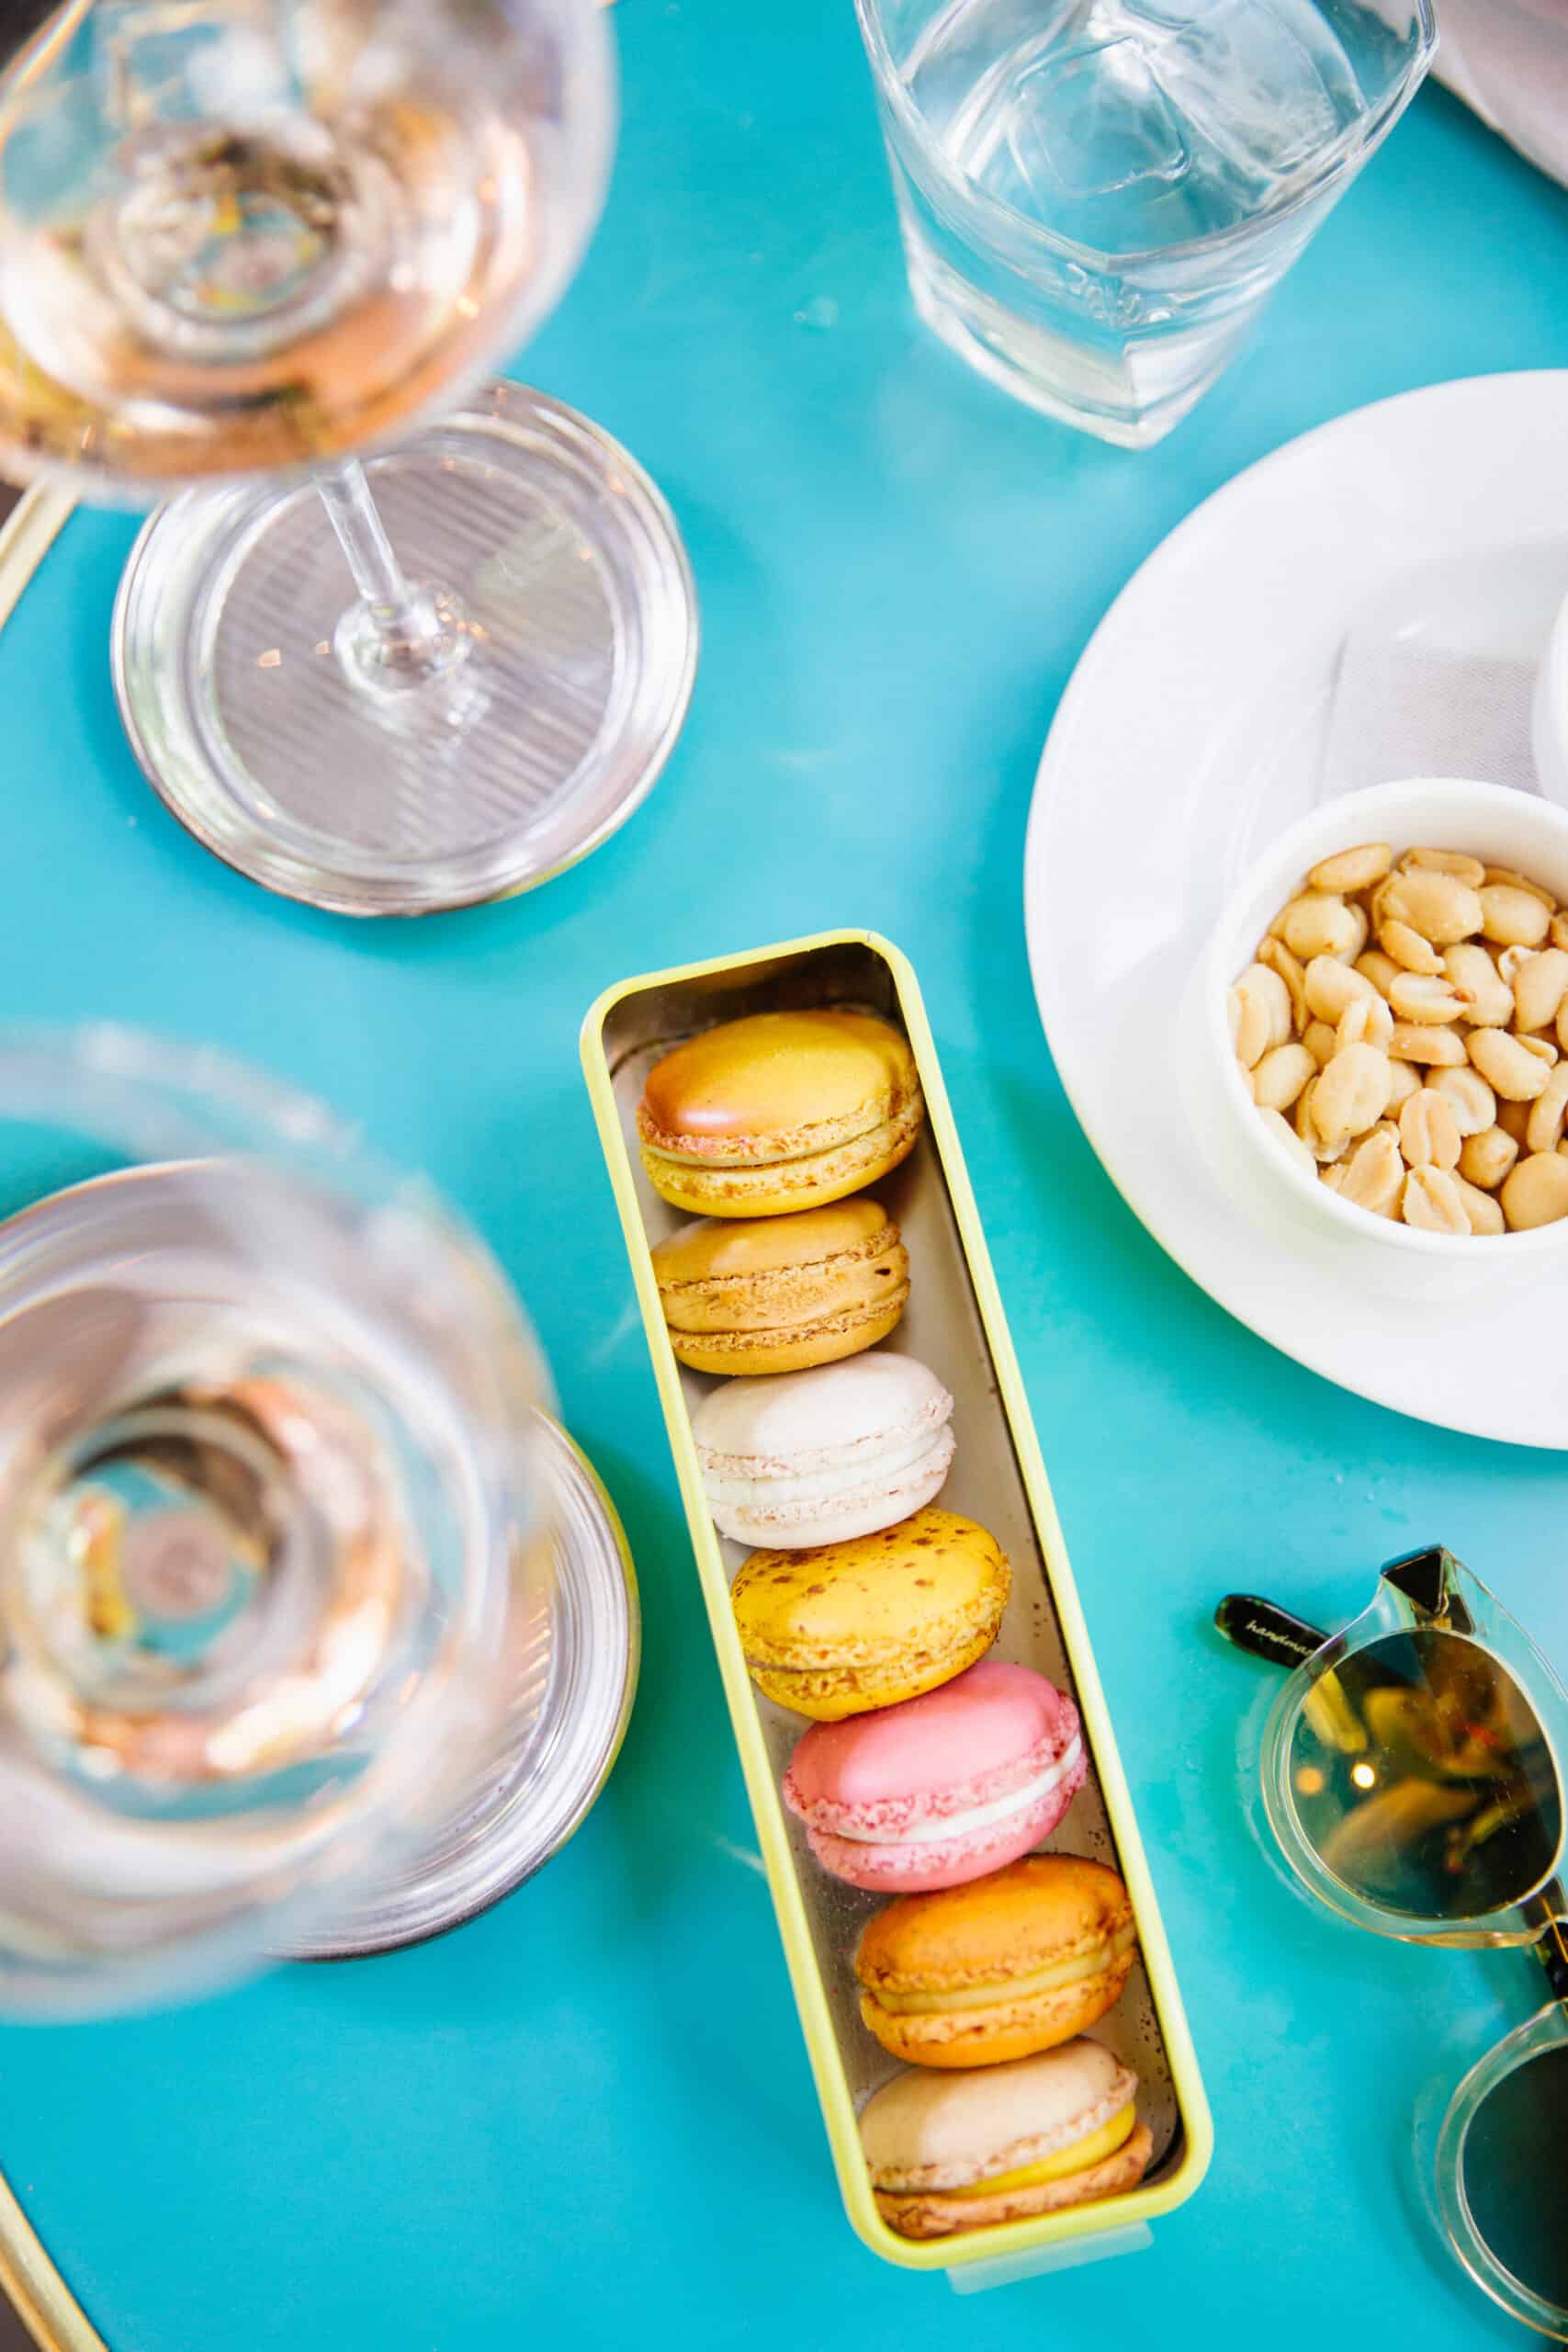 French macarons on a café table